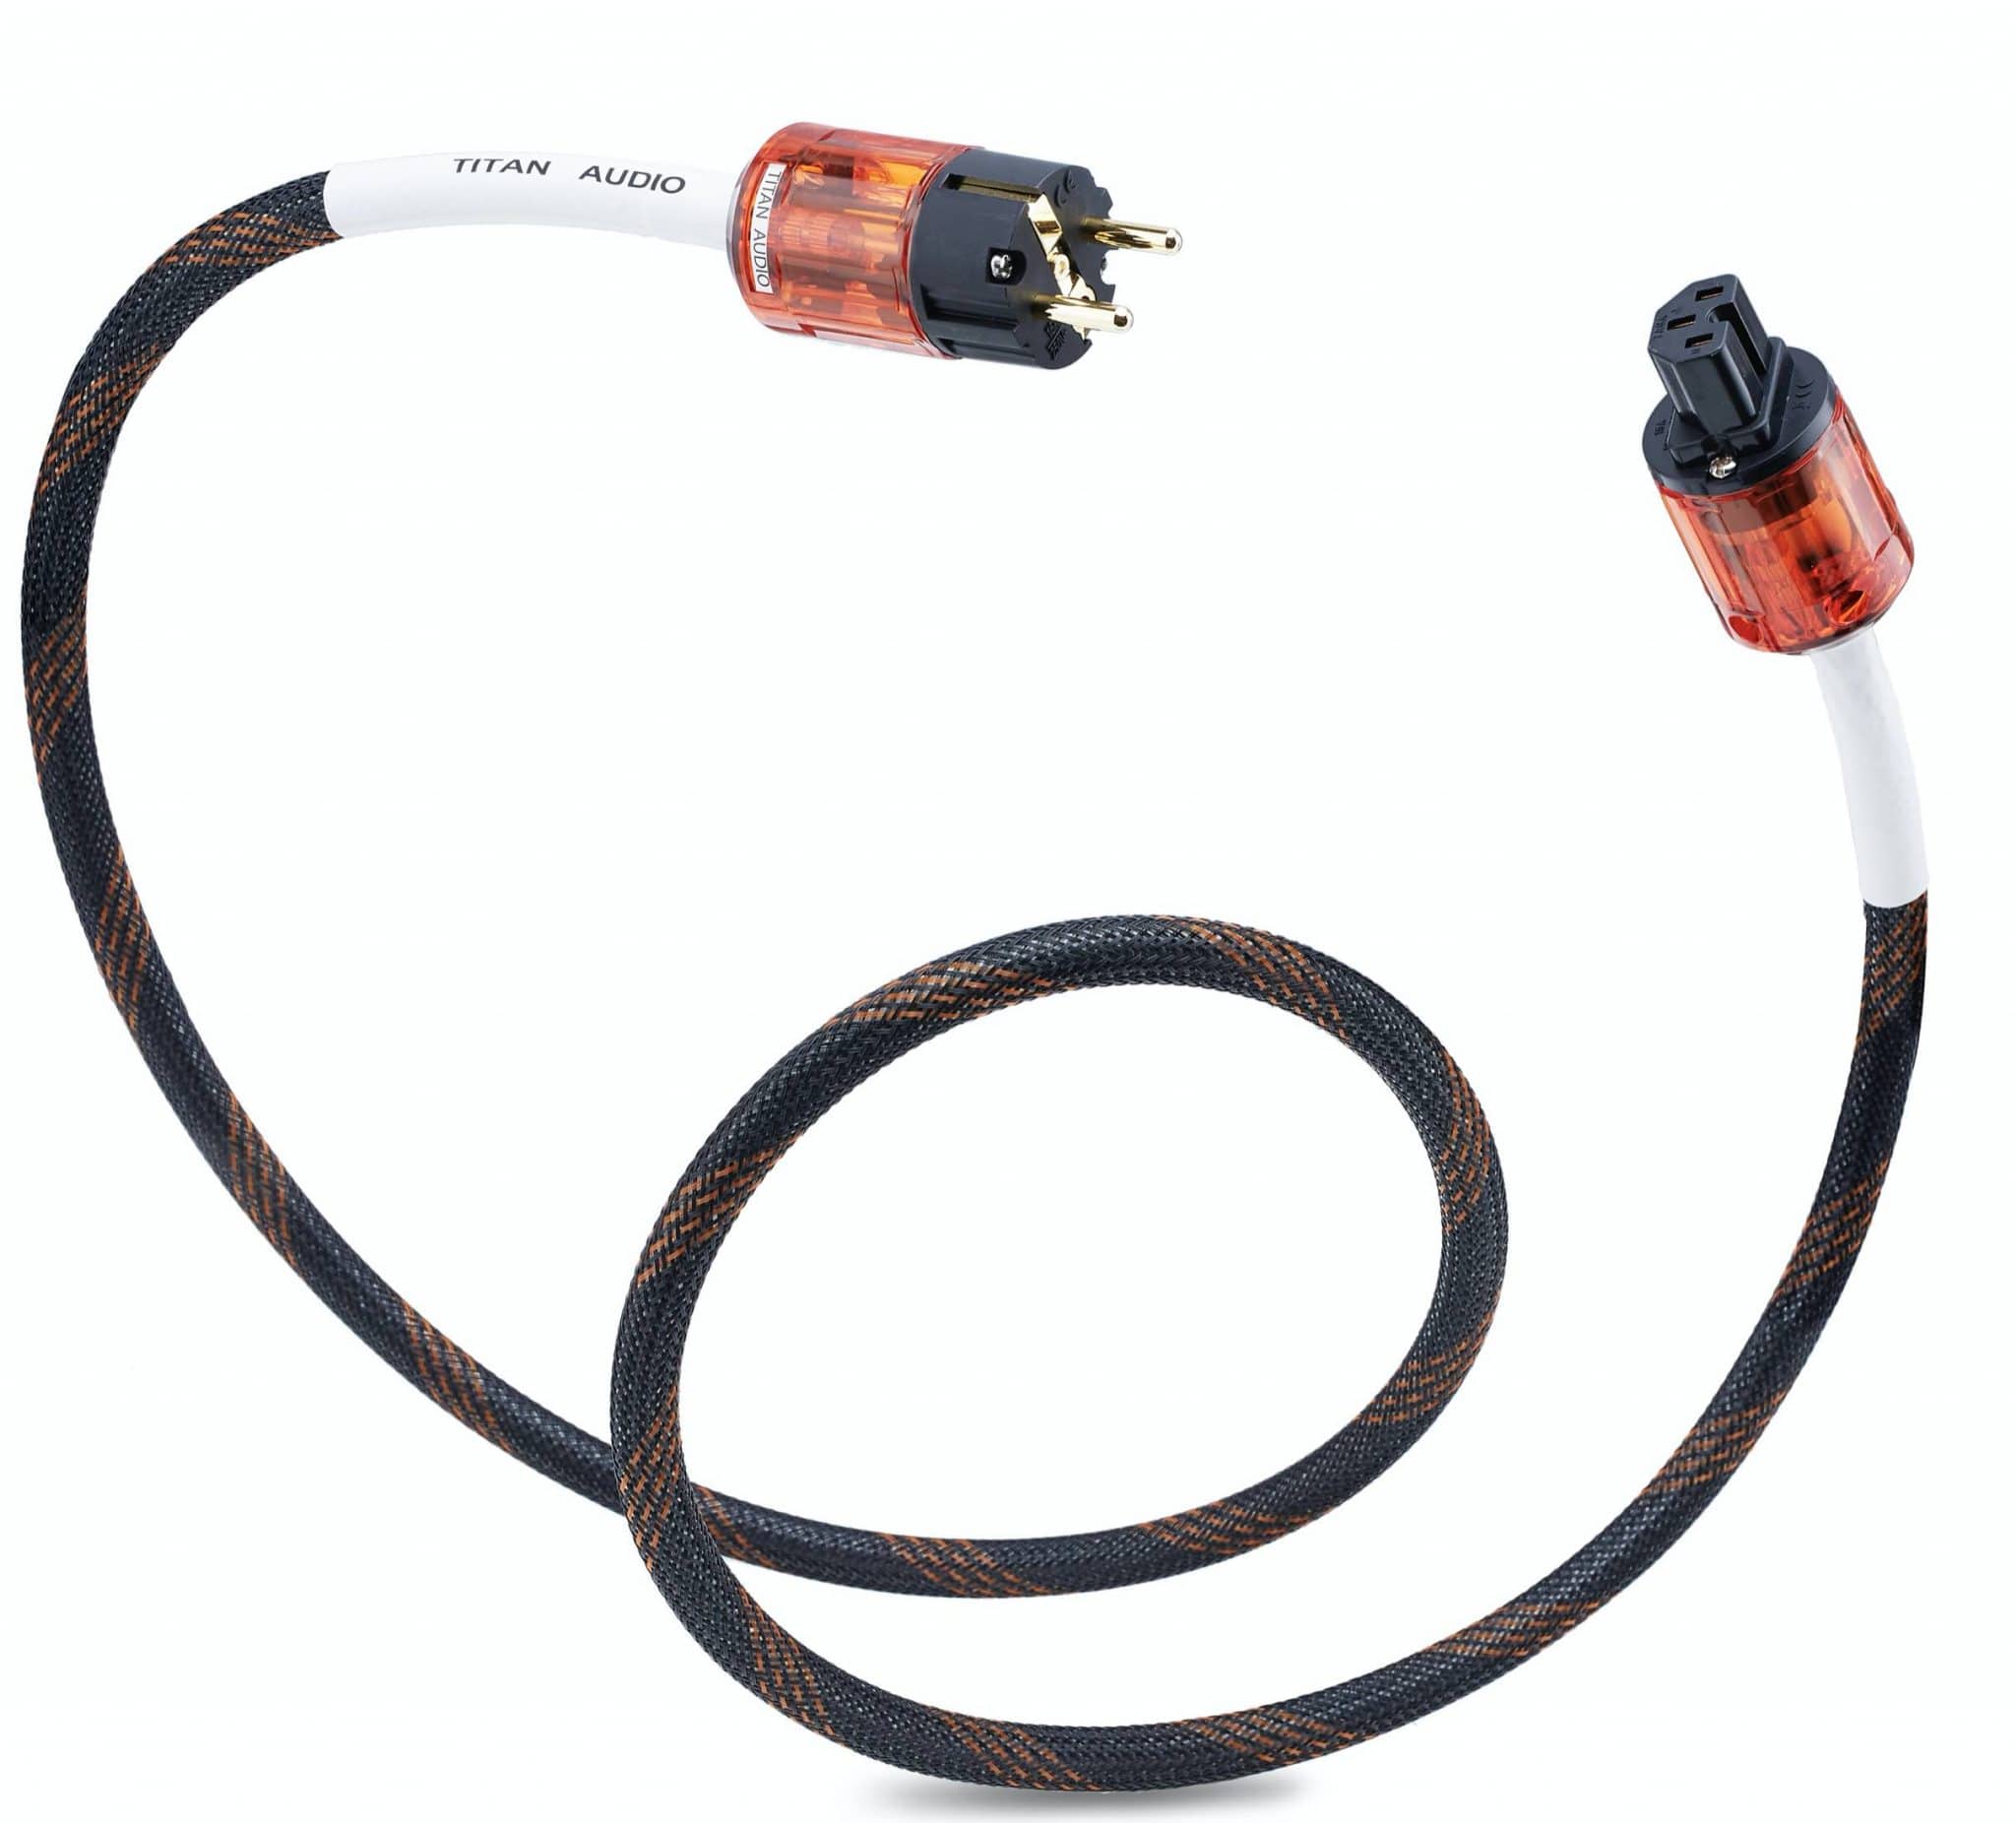 Nyx Mains Cable From Titan Audio